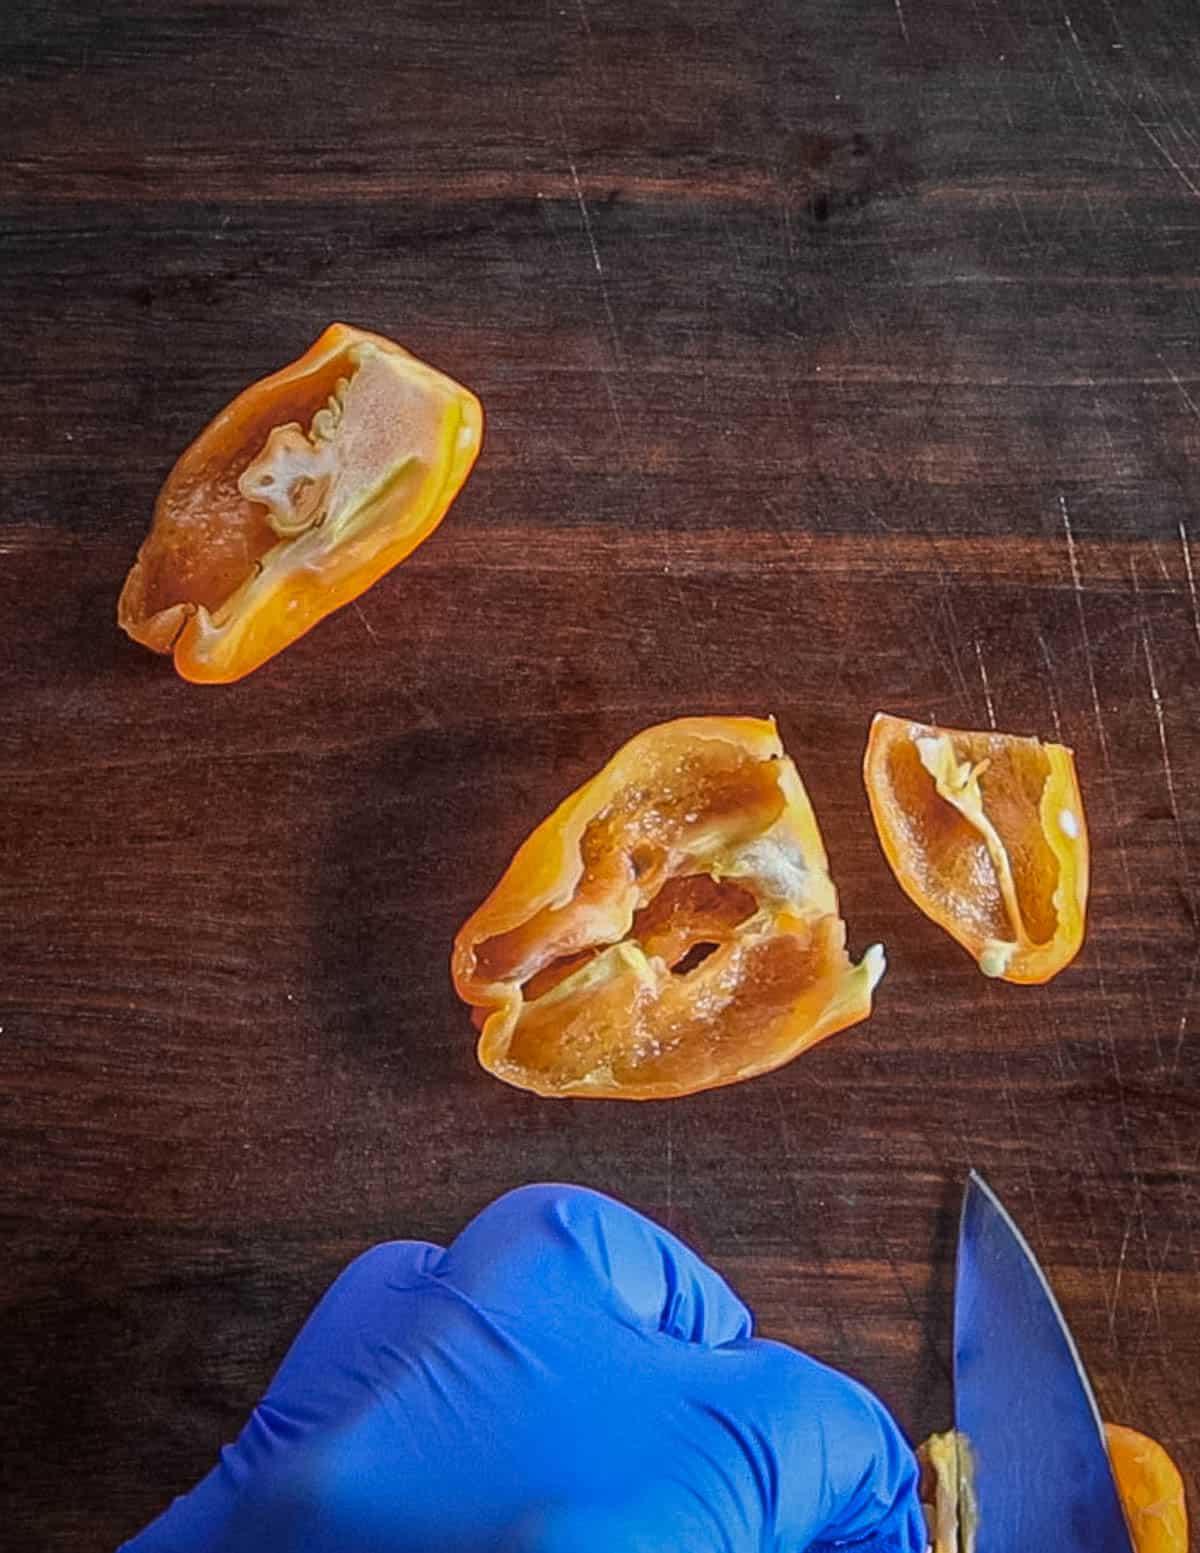 Removing seeds from habanero hot peppers. 